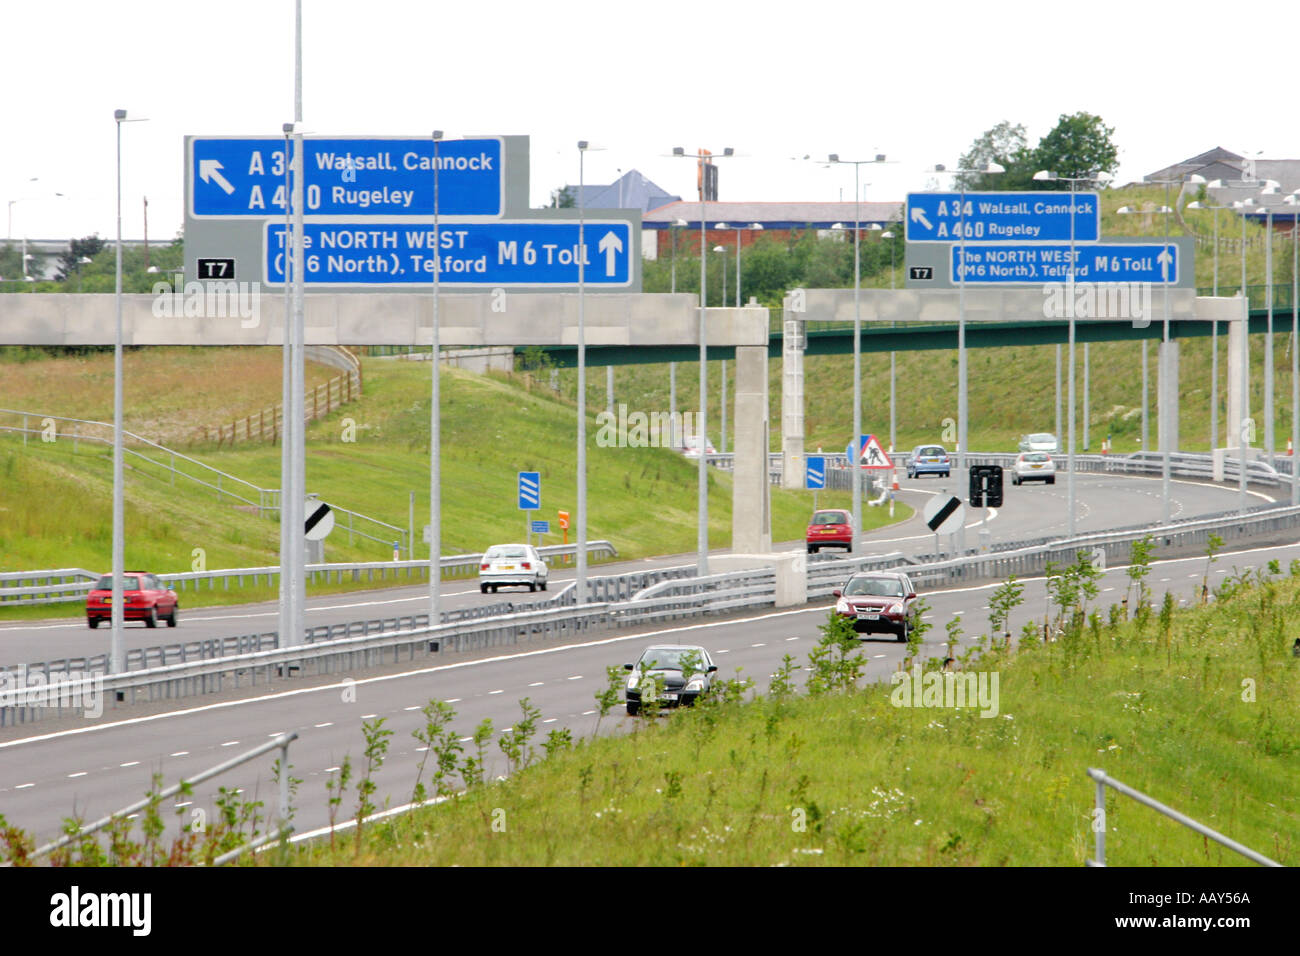 Signs and toll booths on the M6 toll road England Stock Photo